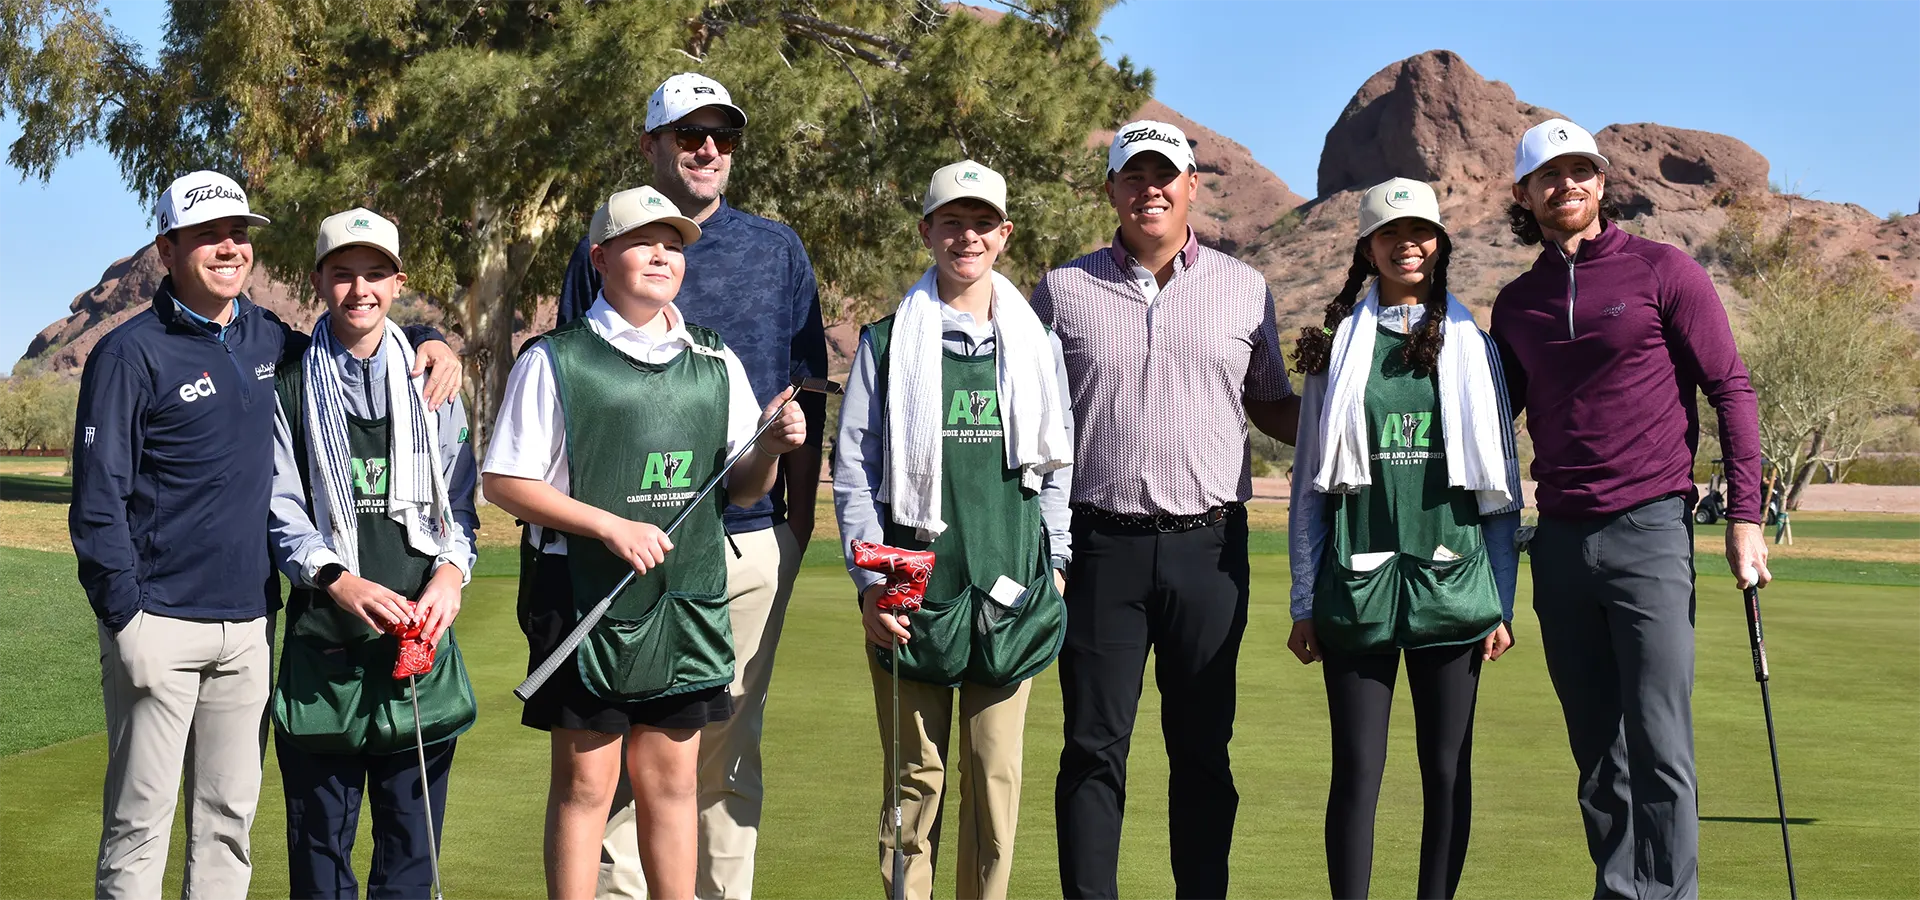 AZ Caddie and Leadership Academy Feature in Forbes.com